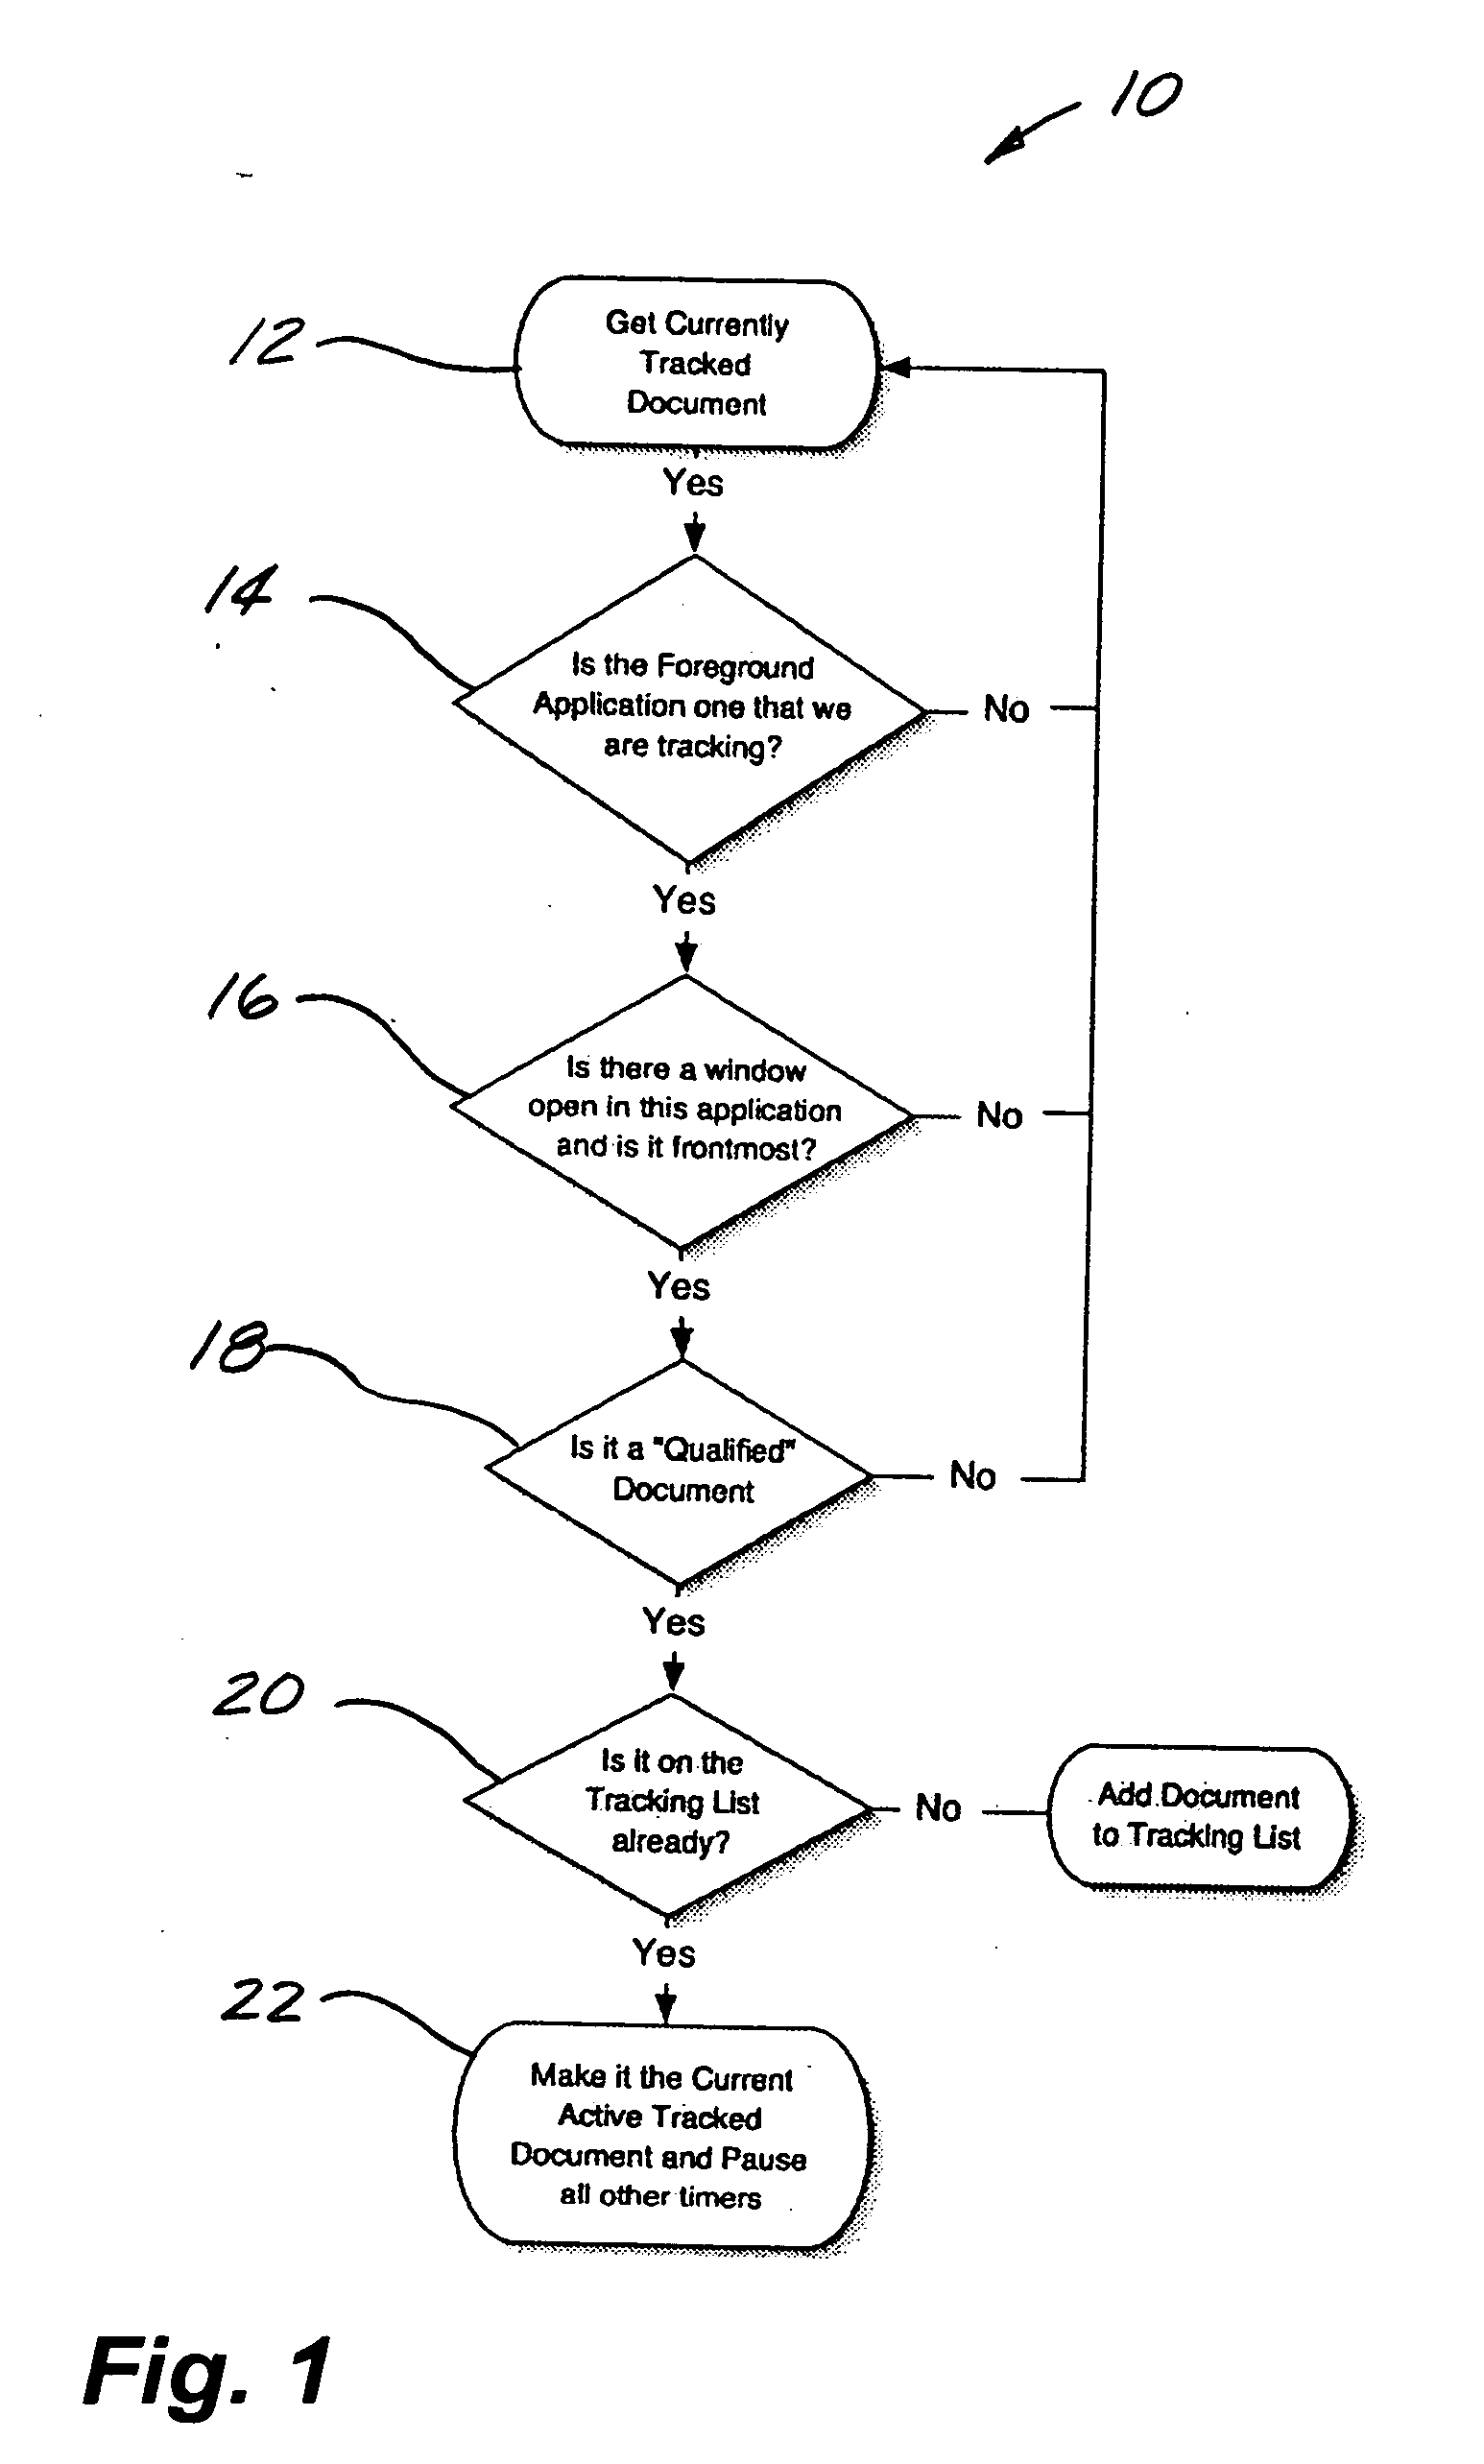 Method and system for capturing critical computer-intensive work-related data at the optimal time and with maximum accuracy